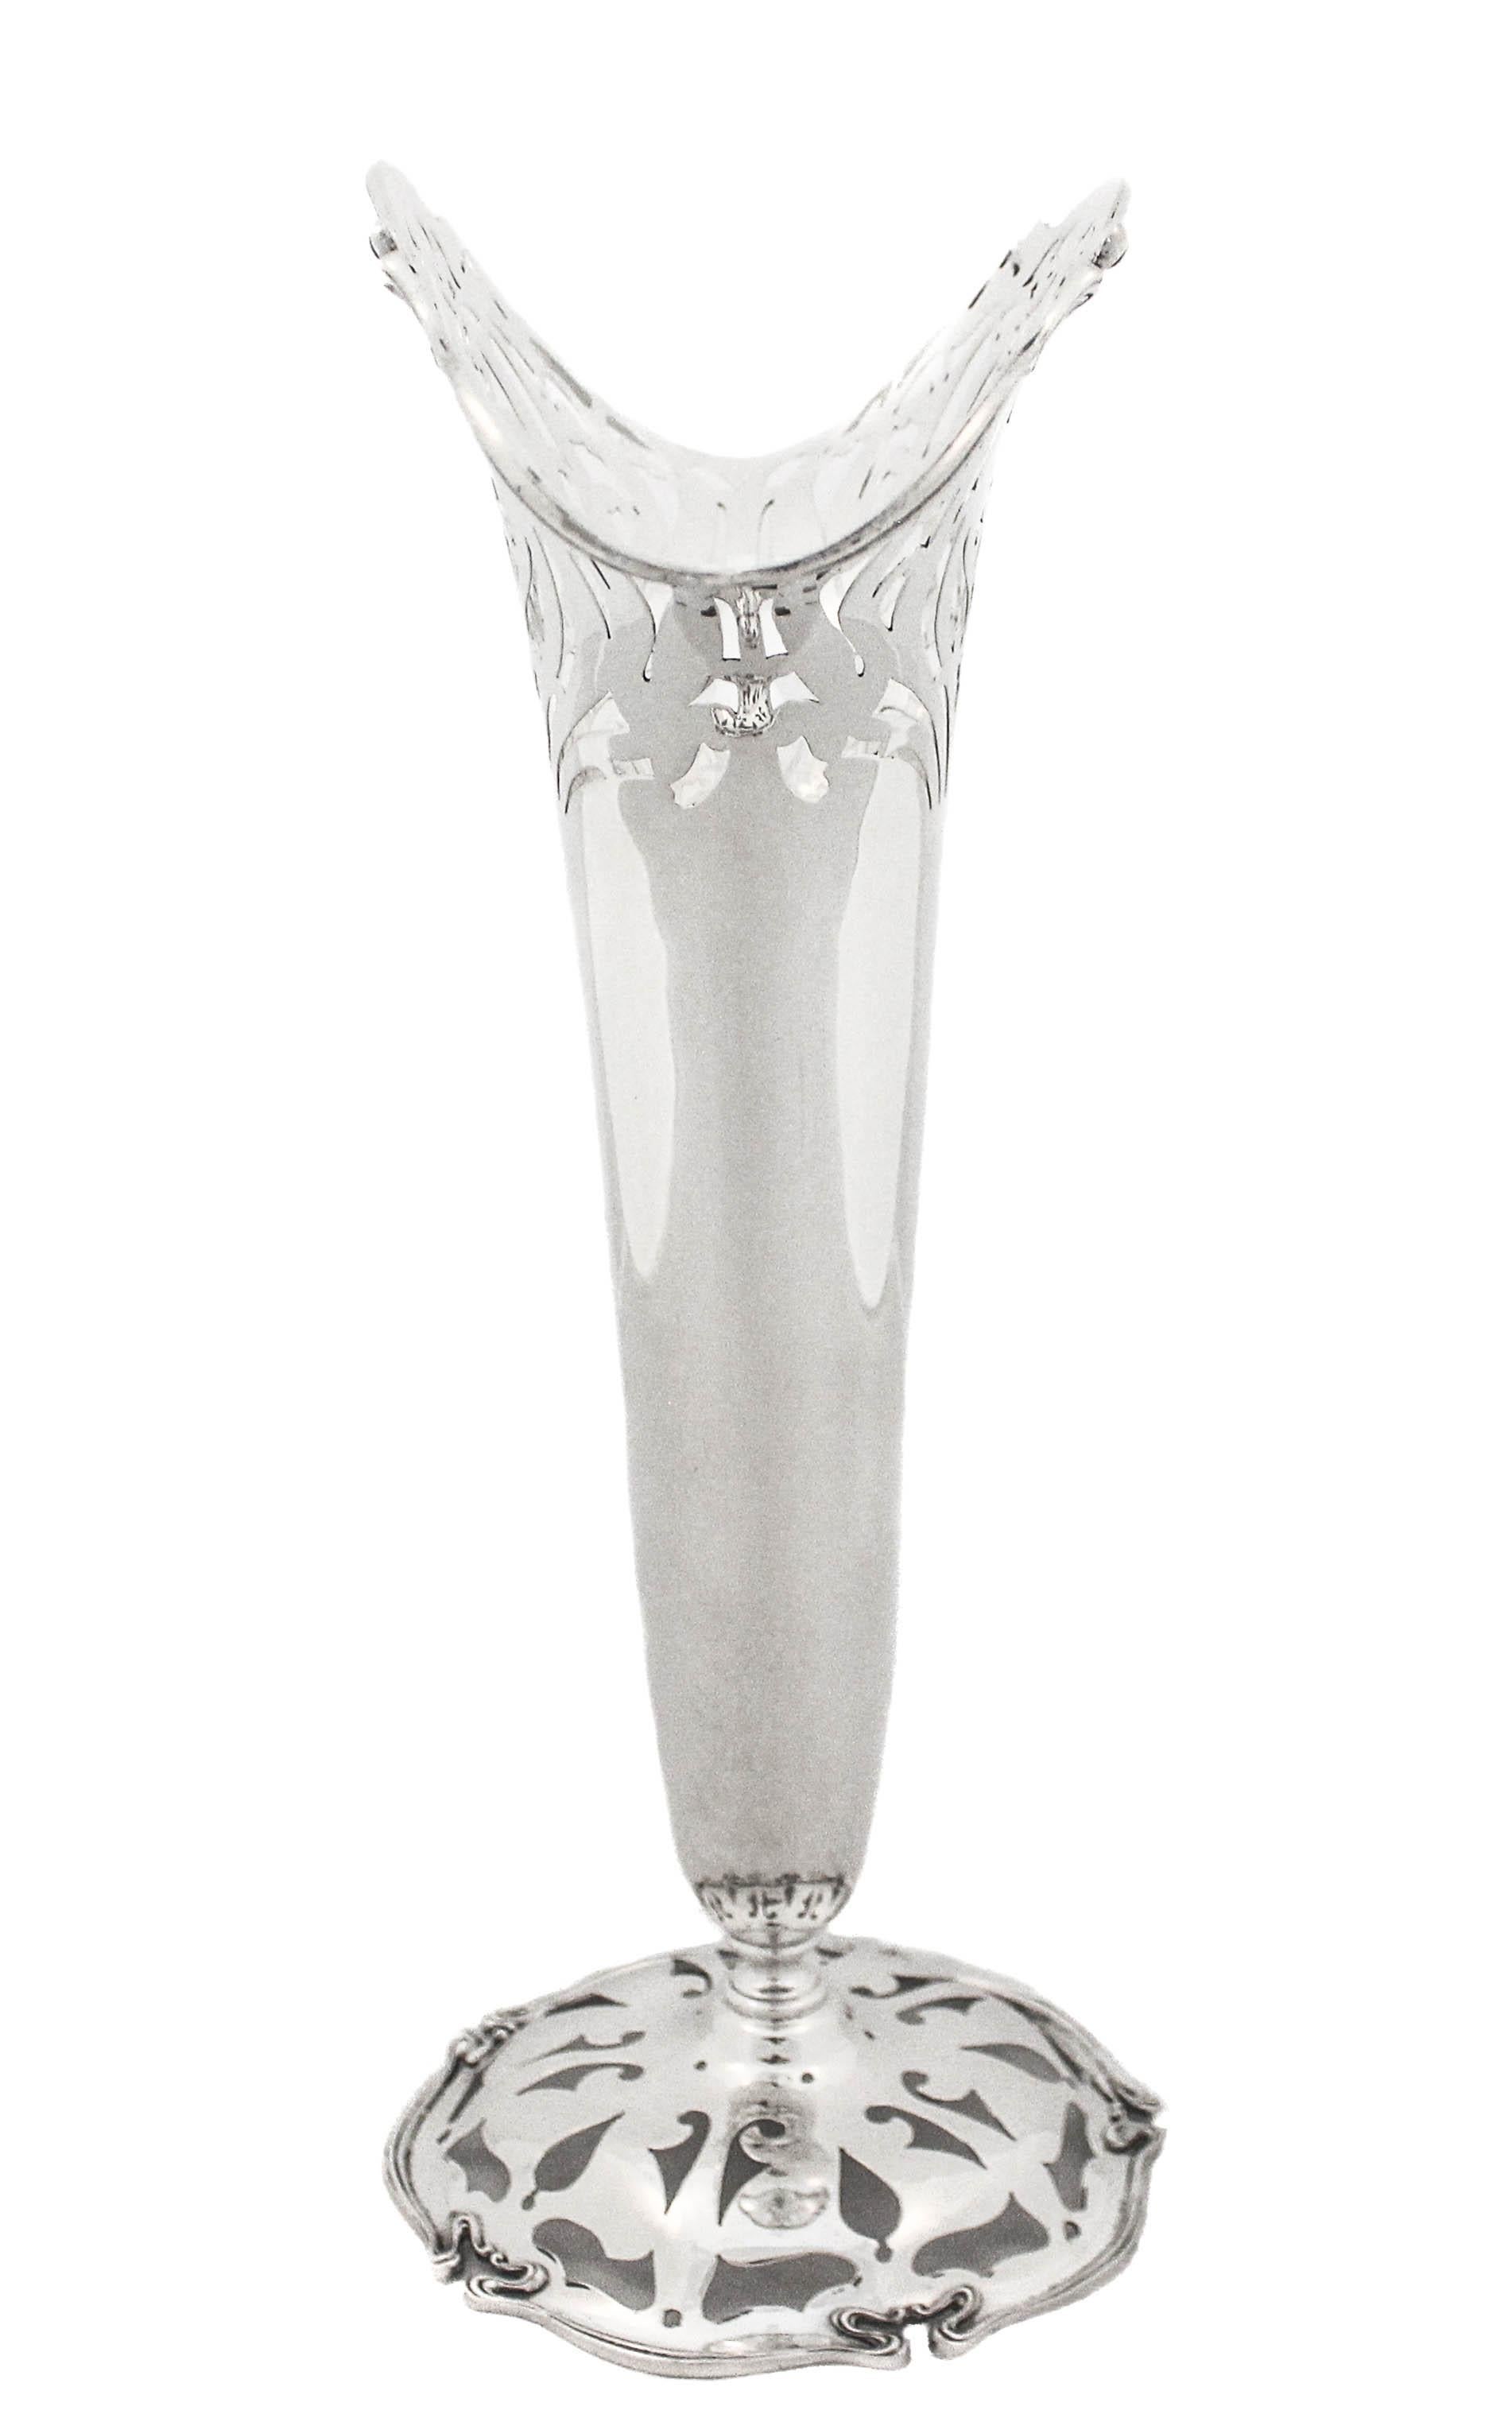 We are thrilled to offer you this magnificent sterling silver vase by Shreve & Company of San Francisco.  A great example of Art Nouveau from the early 20th century.  Art Nouveau was at its peak and this vase captures the essence of that genre.  The